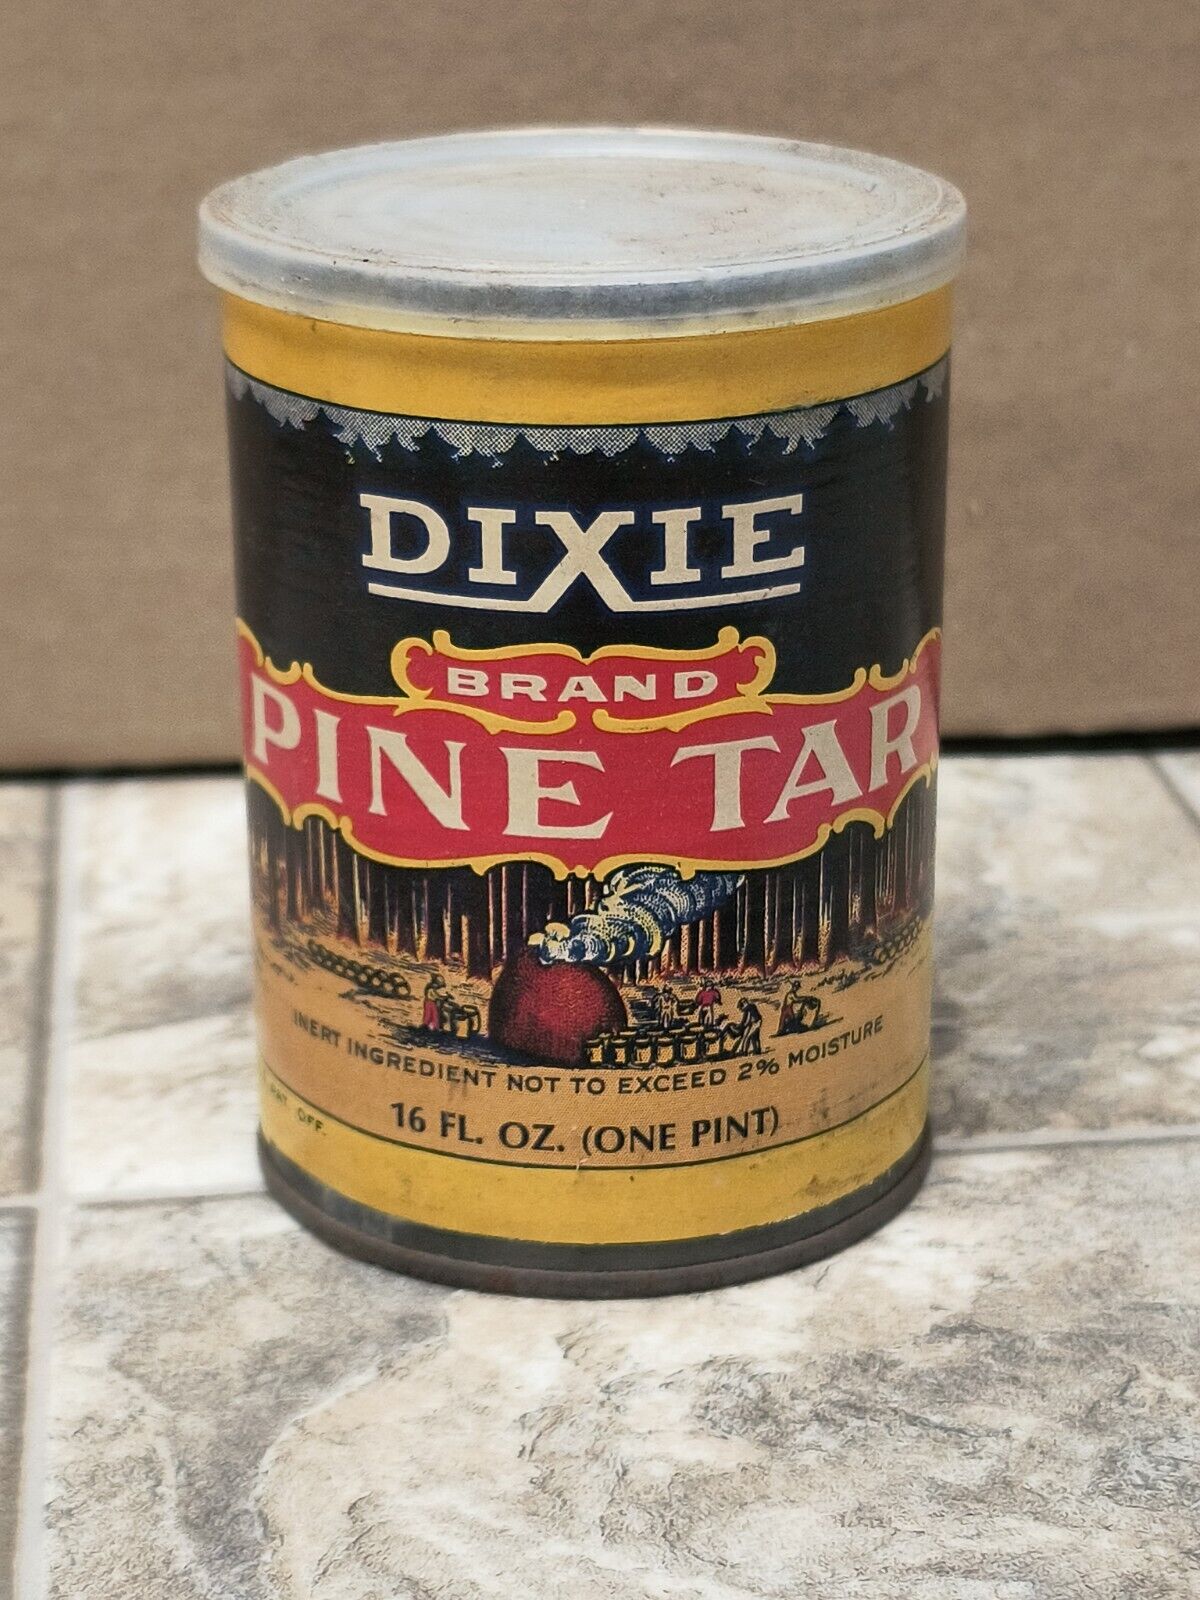 Vintage Unopened DIXIE PINE TAR Brand Tin Can 1 Pint, Paper Label. 